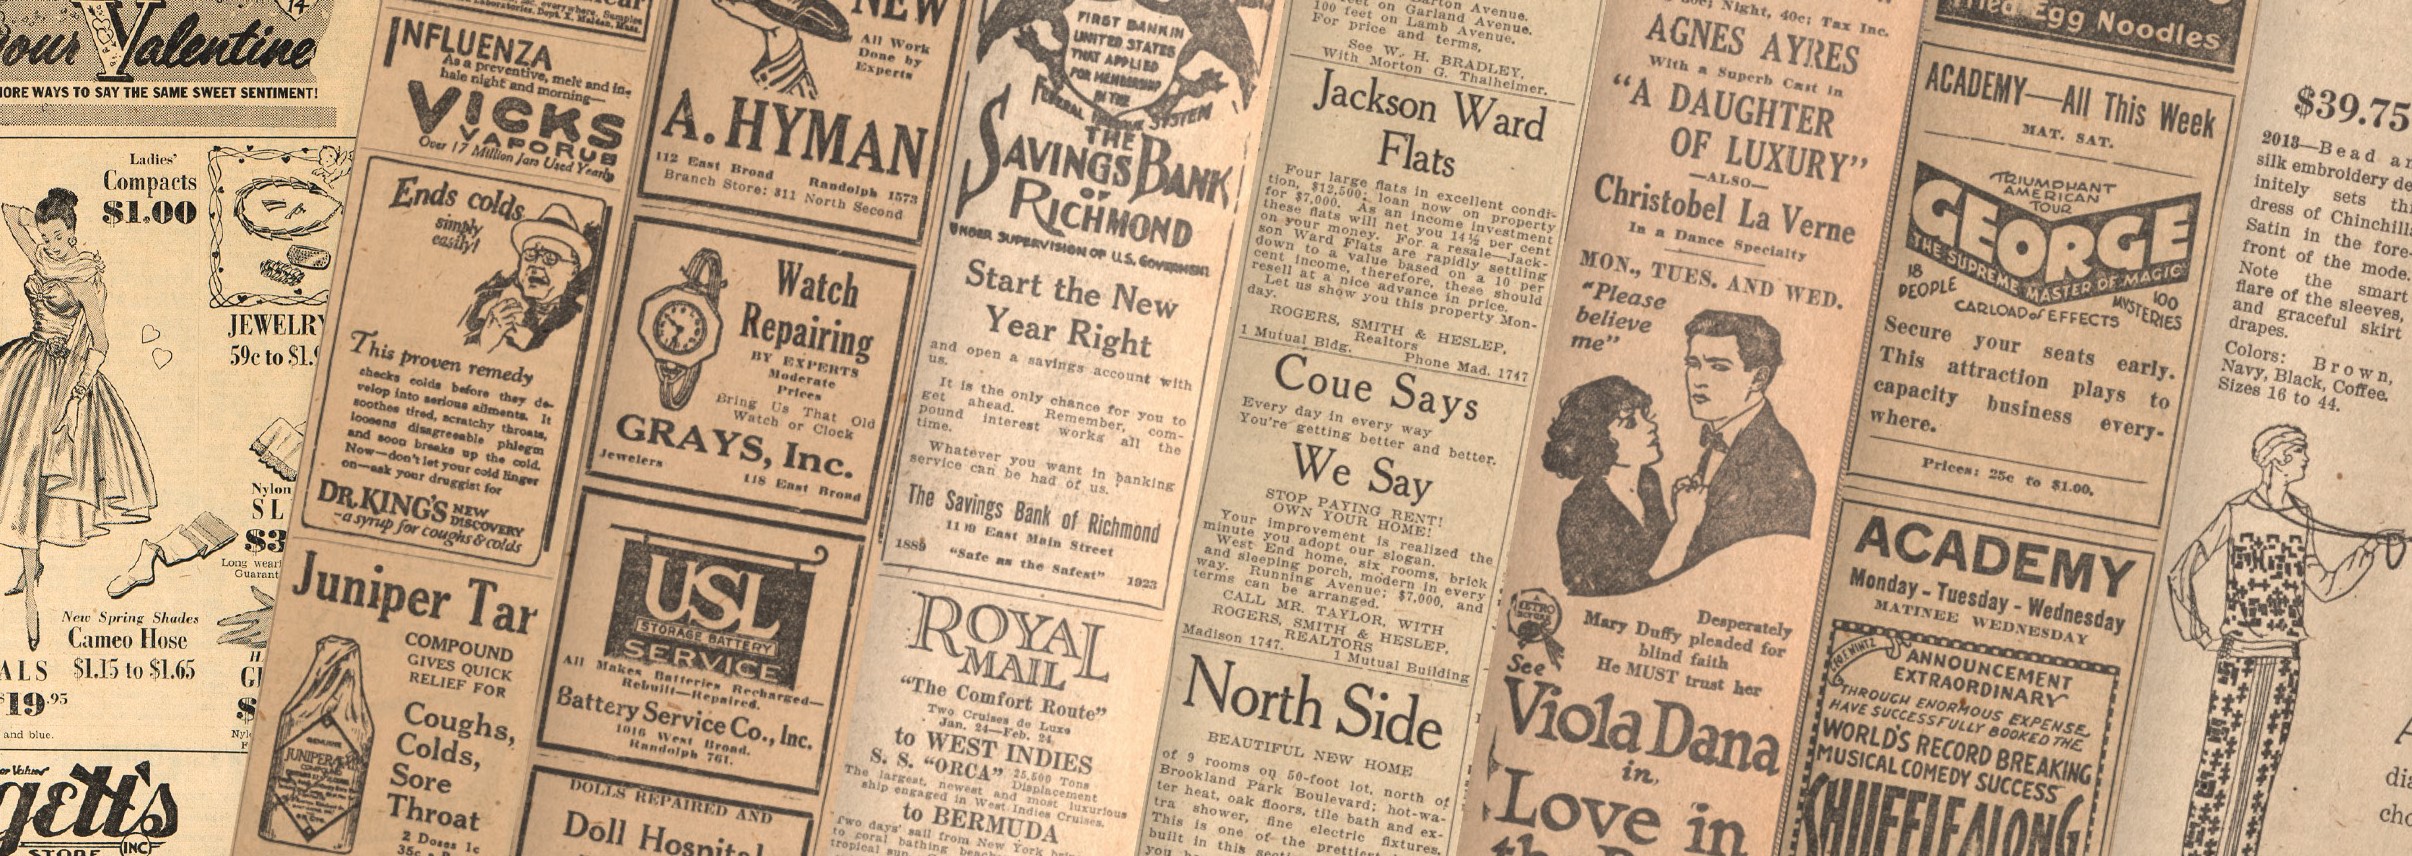 Radio Days: The Norfolk News Index and A Posting From the Electric Front, 1939-1940